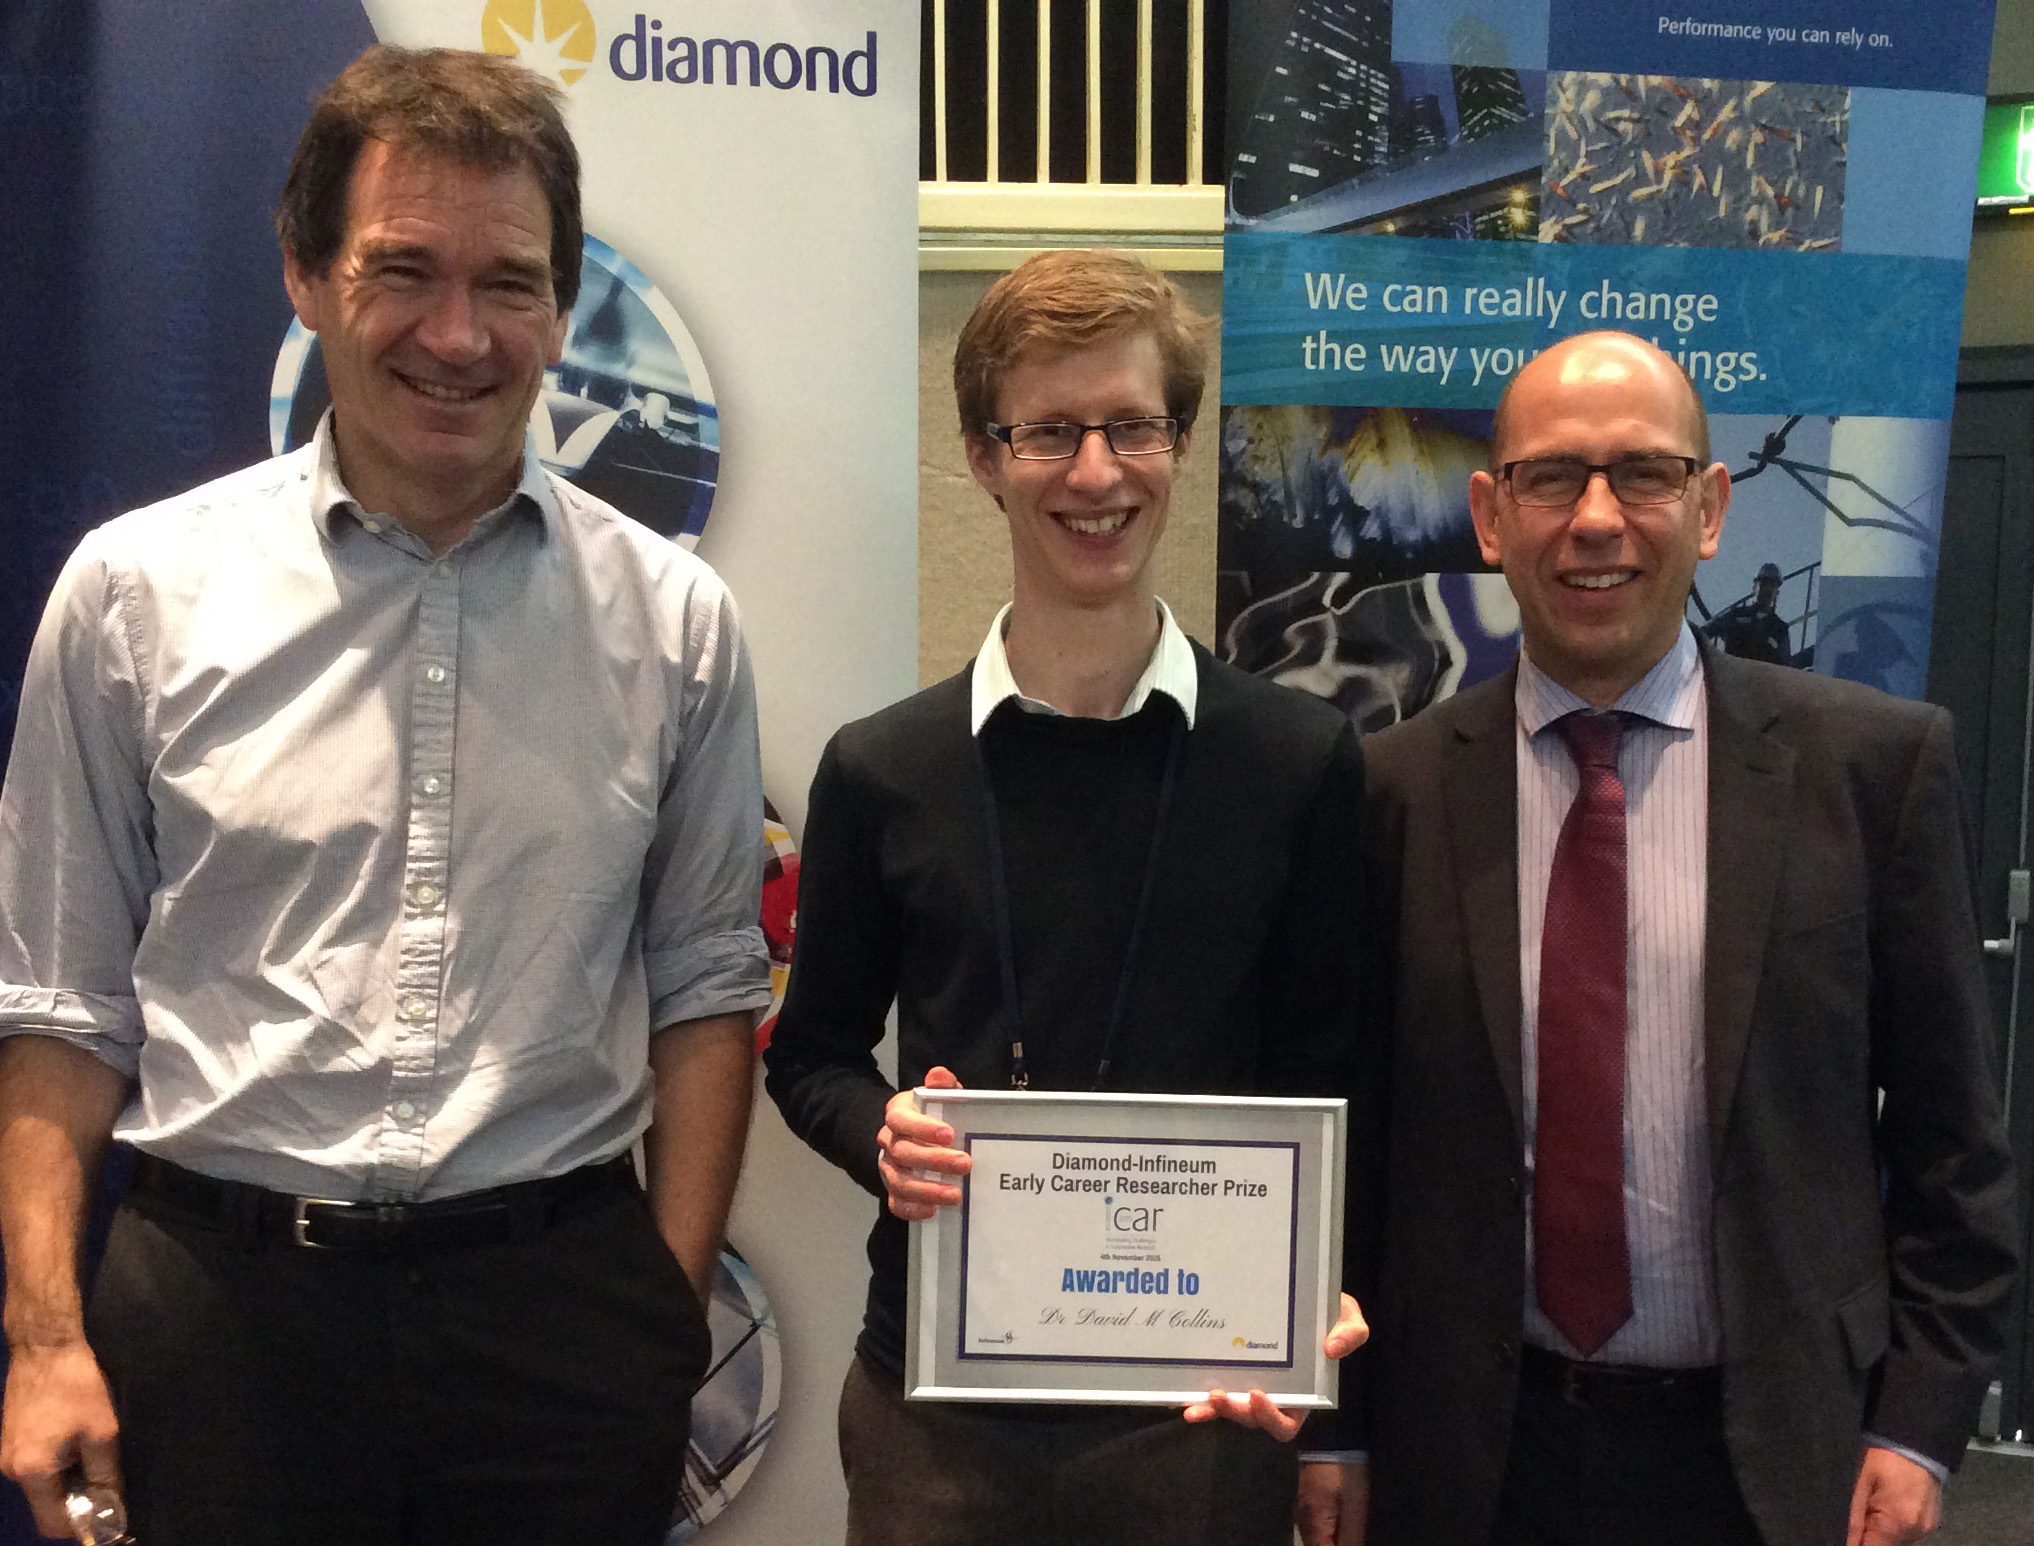 David accepting his award at the 2015 iCAR conference
<br/>
<br/>L to R: Andrew Harrison (CEO Diamond Light Source), David Collins (Early Career Researcher Prize Winner) and Chris Locke (EVP of Marketing and Technology (Infineum)